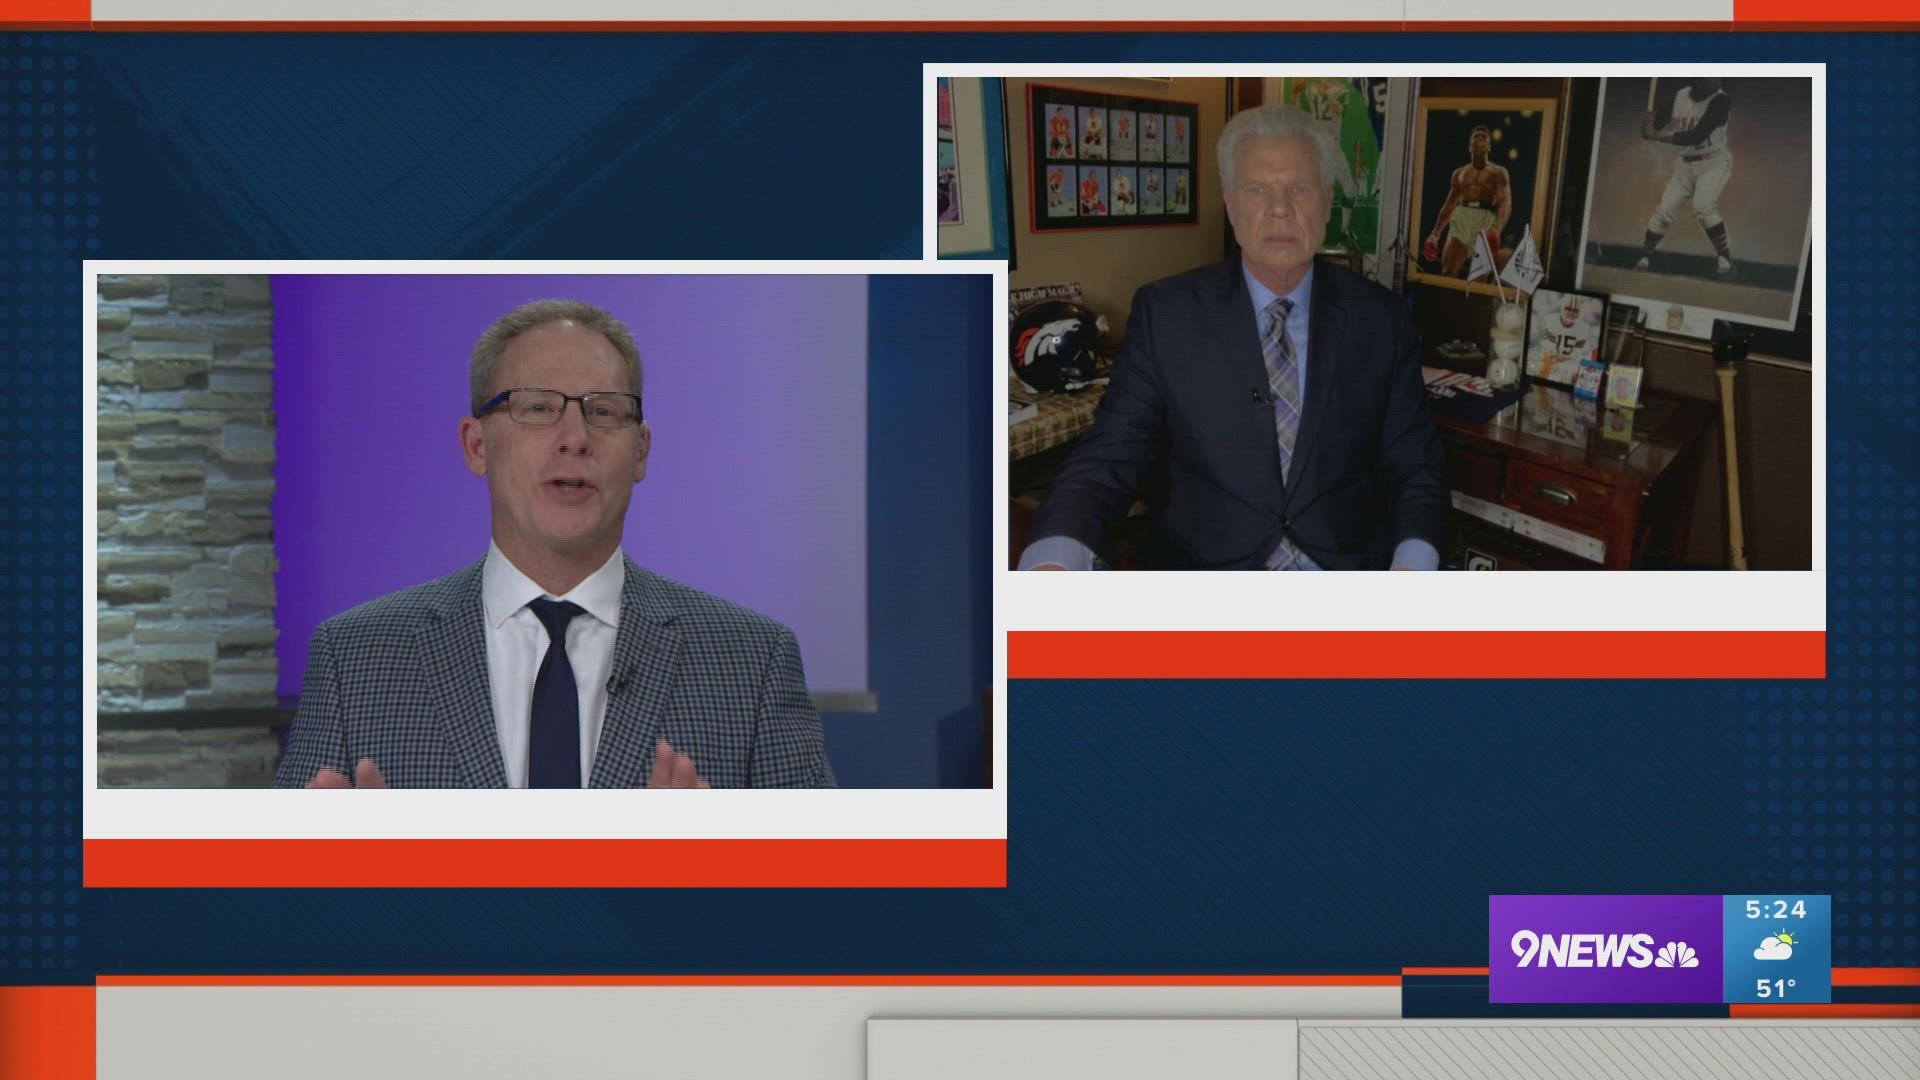 Mike Klis joins Rod Mackey live on 9NEWS to discuss the latest surrounding the Denver Broncos.